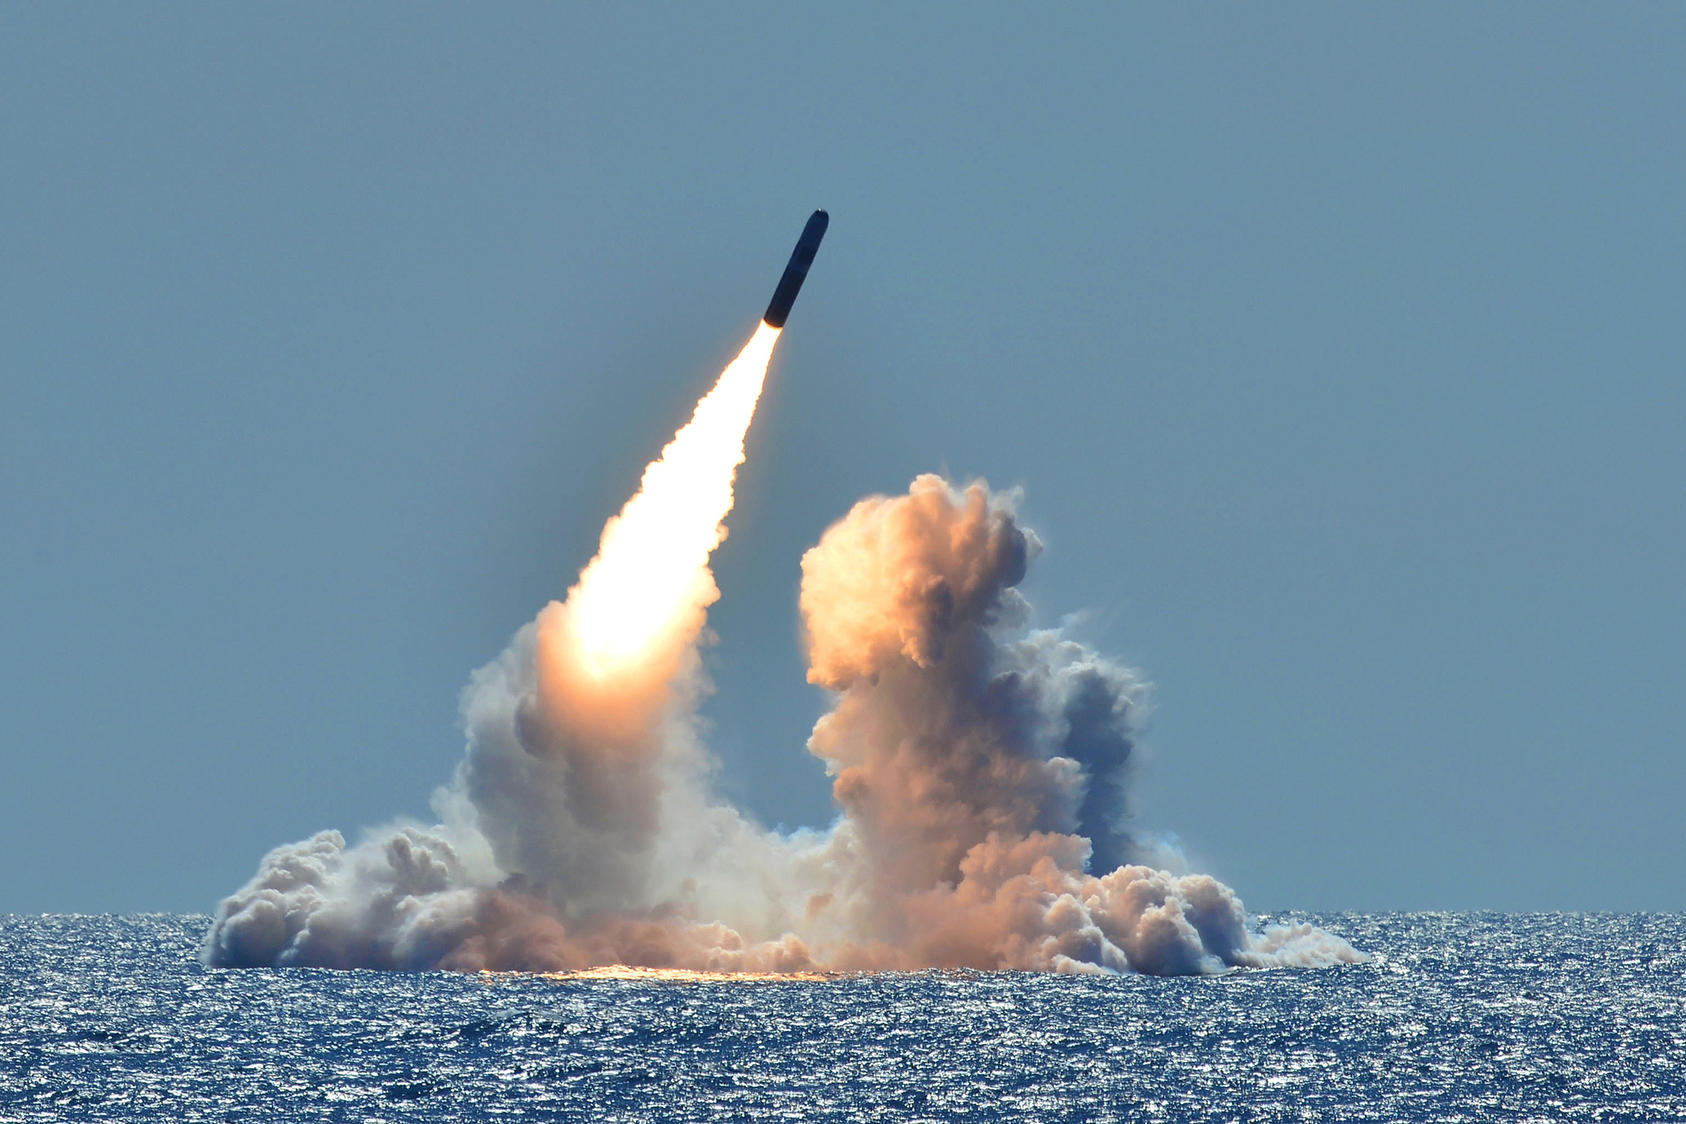 An unarmed Trident II D5 missile launches from the ballistic missile submarine USS Nebraska off the coast of California on March 26, 2018. (Navy Petty Officer 1st Class Ronald Gutridg/U.S. Department of Defense)